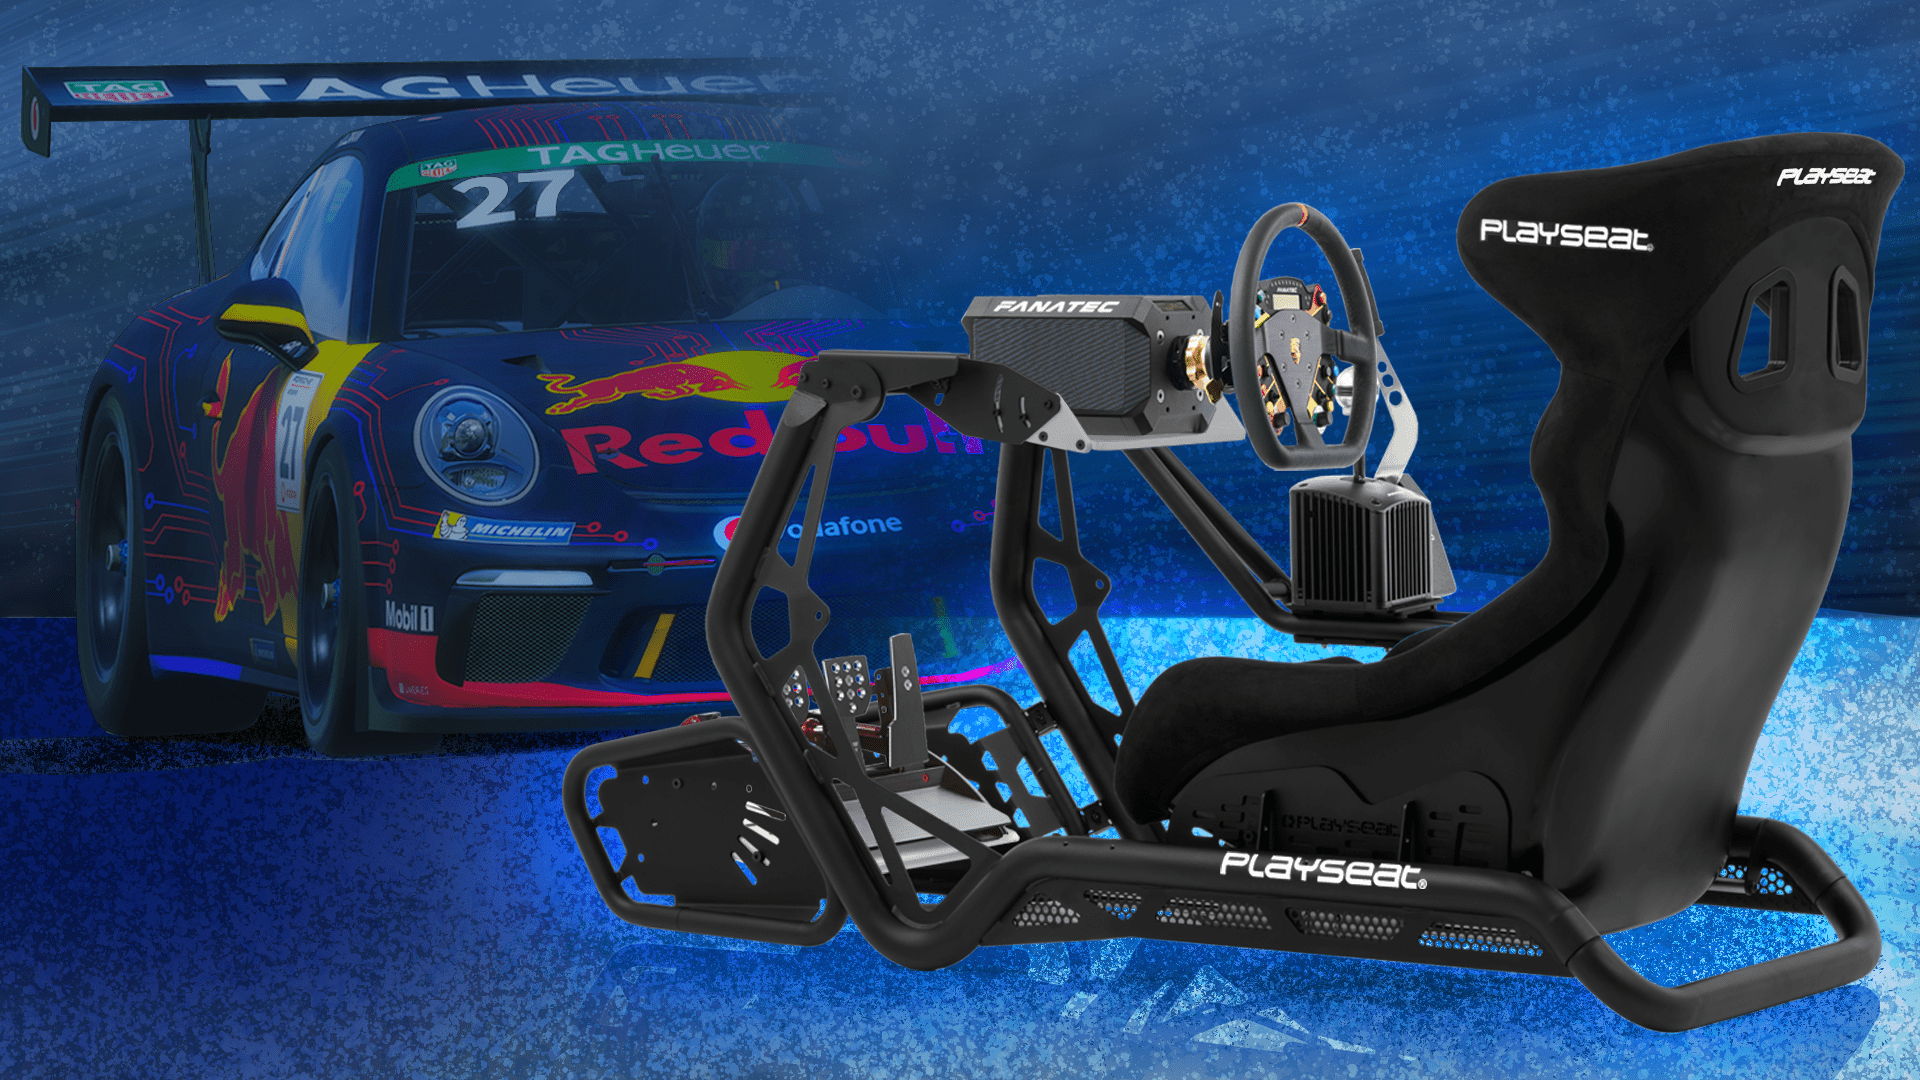 The Playseat Sensation Pro cockpit is getting a facelift for 2021